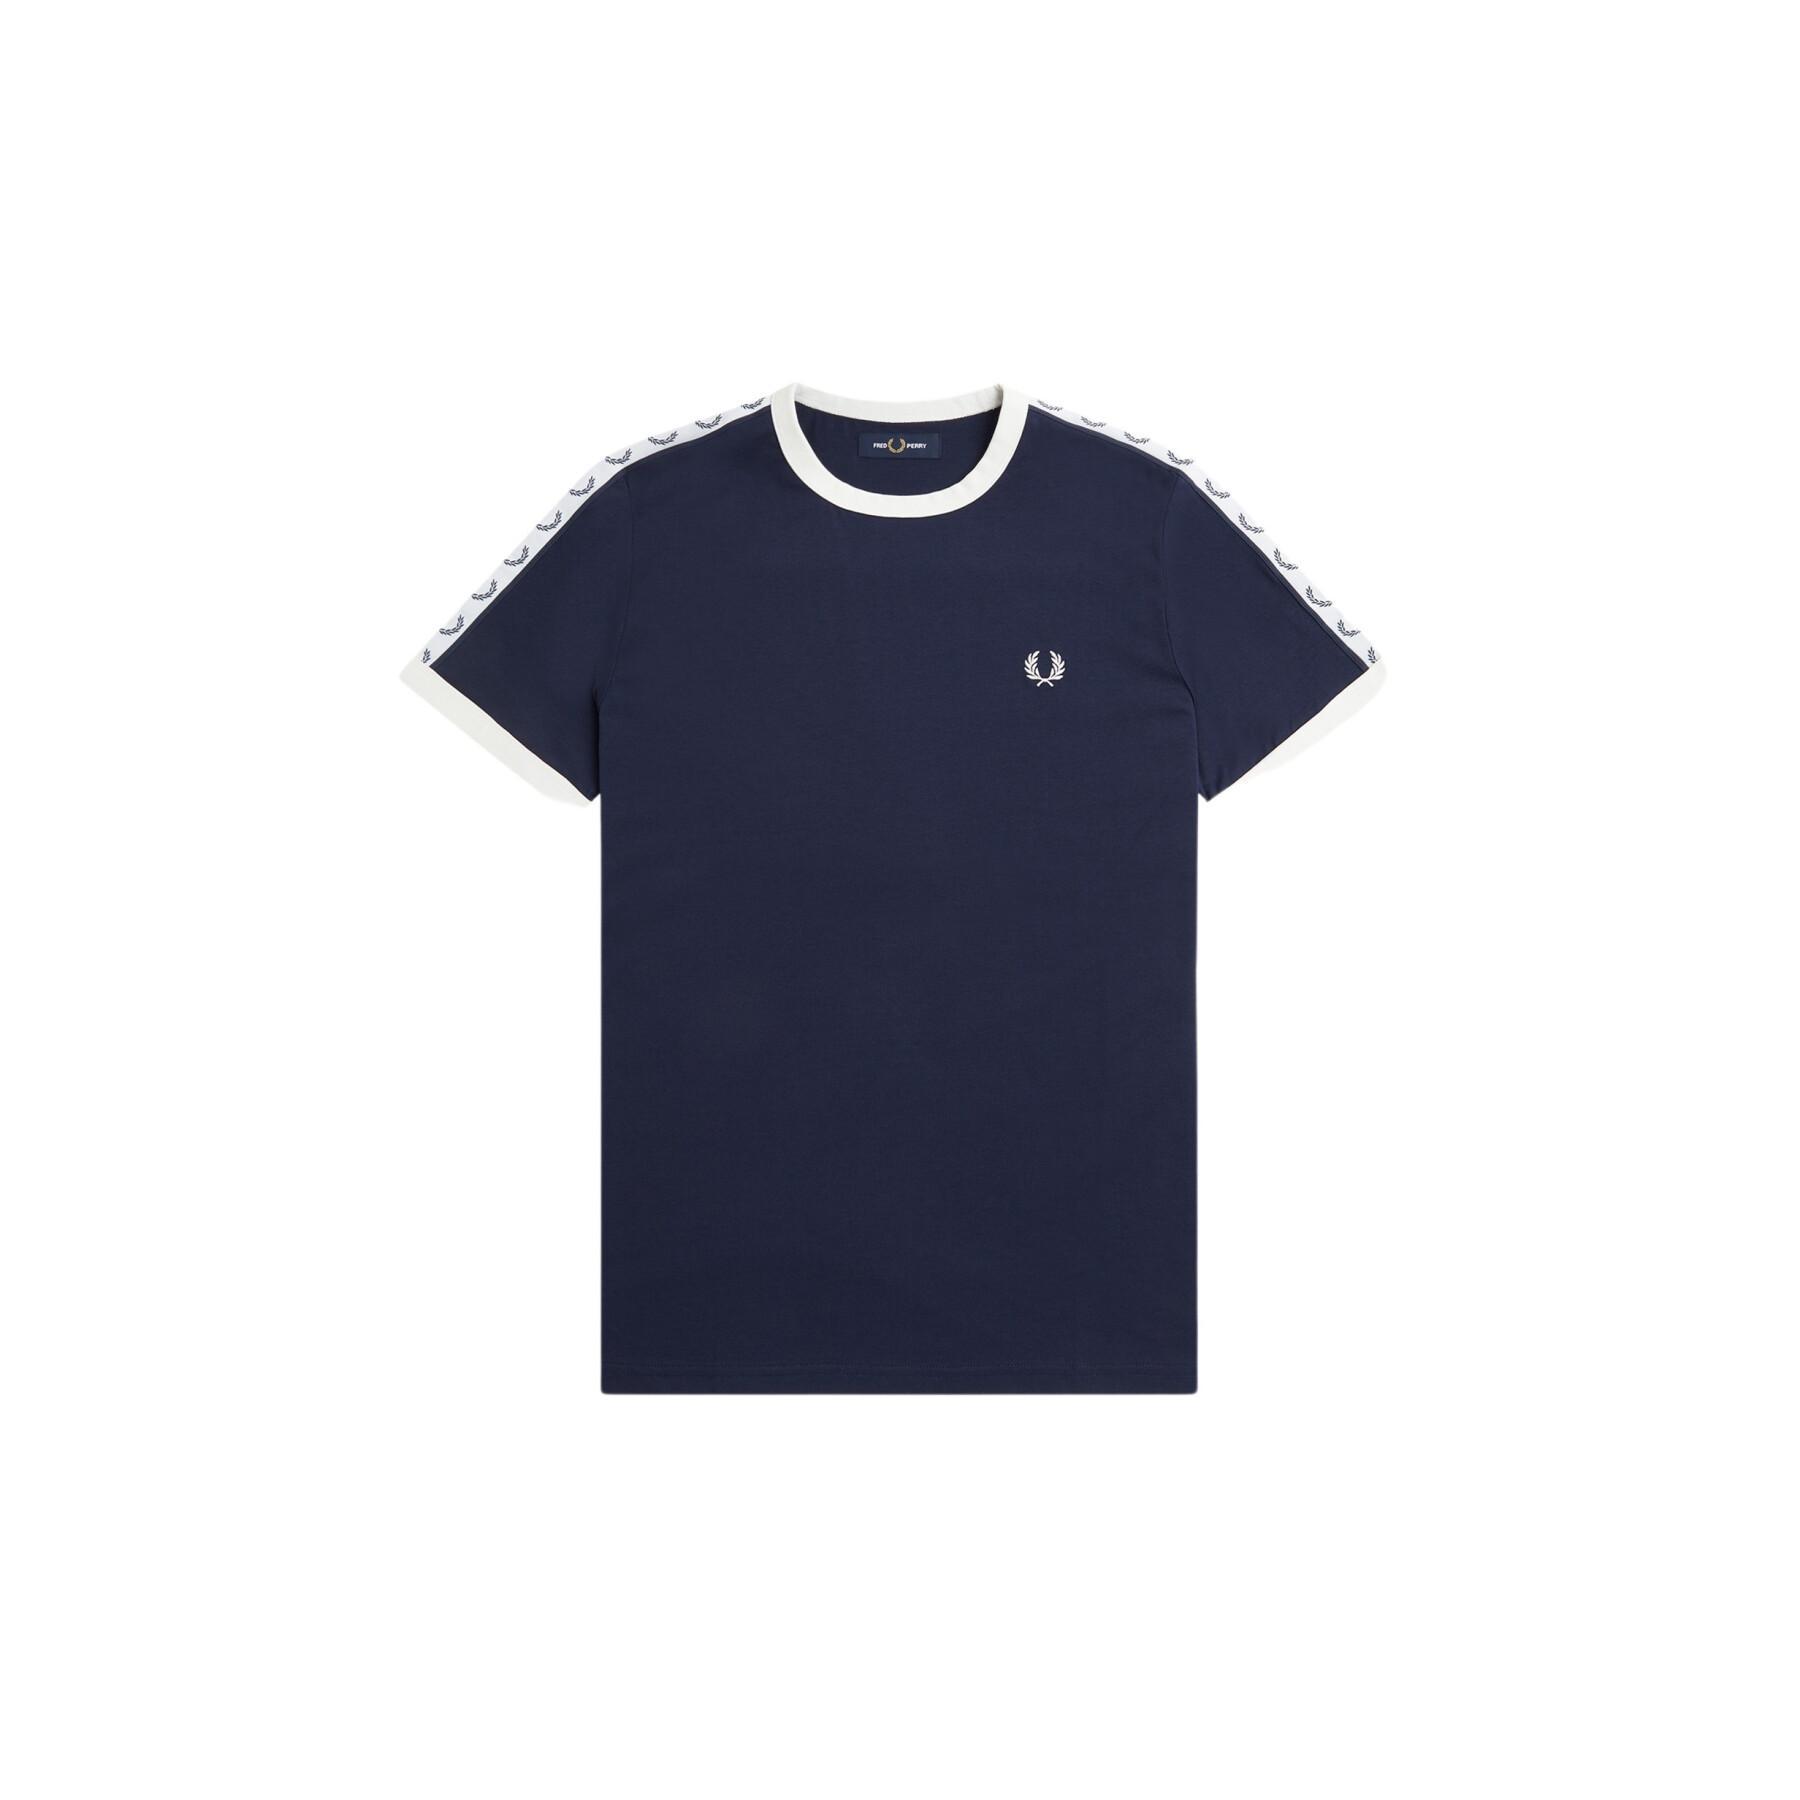 T-shirt met contrasterende rand en band Fred Perry